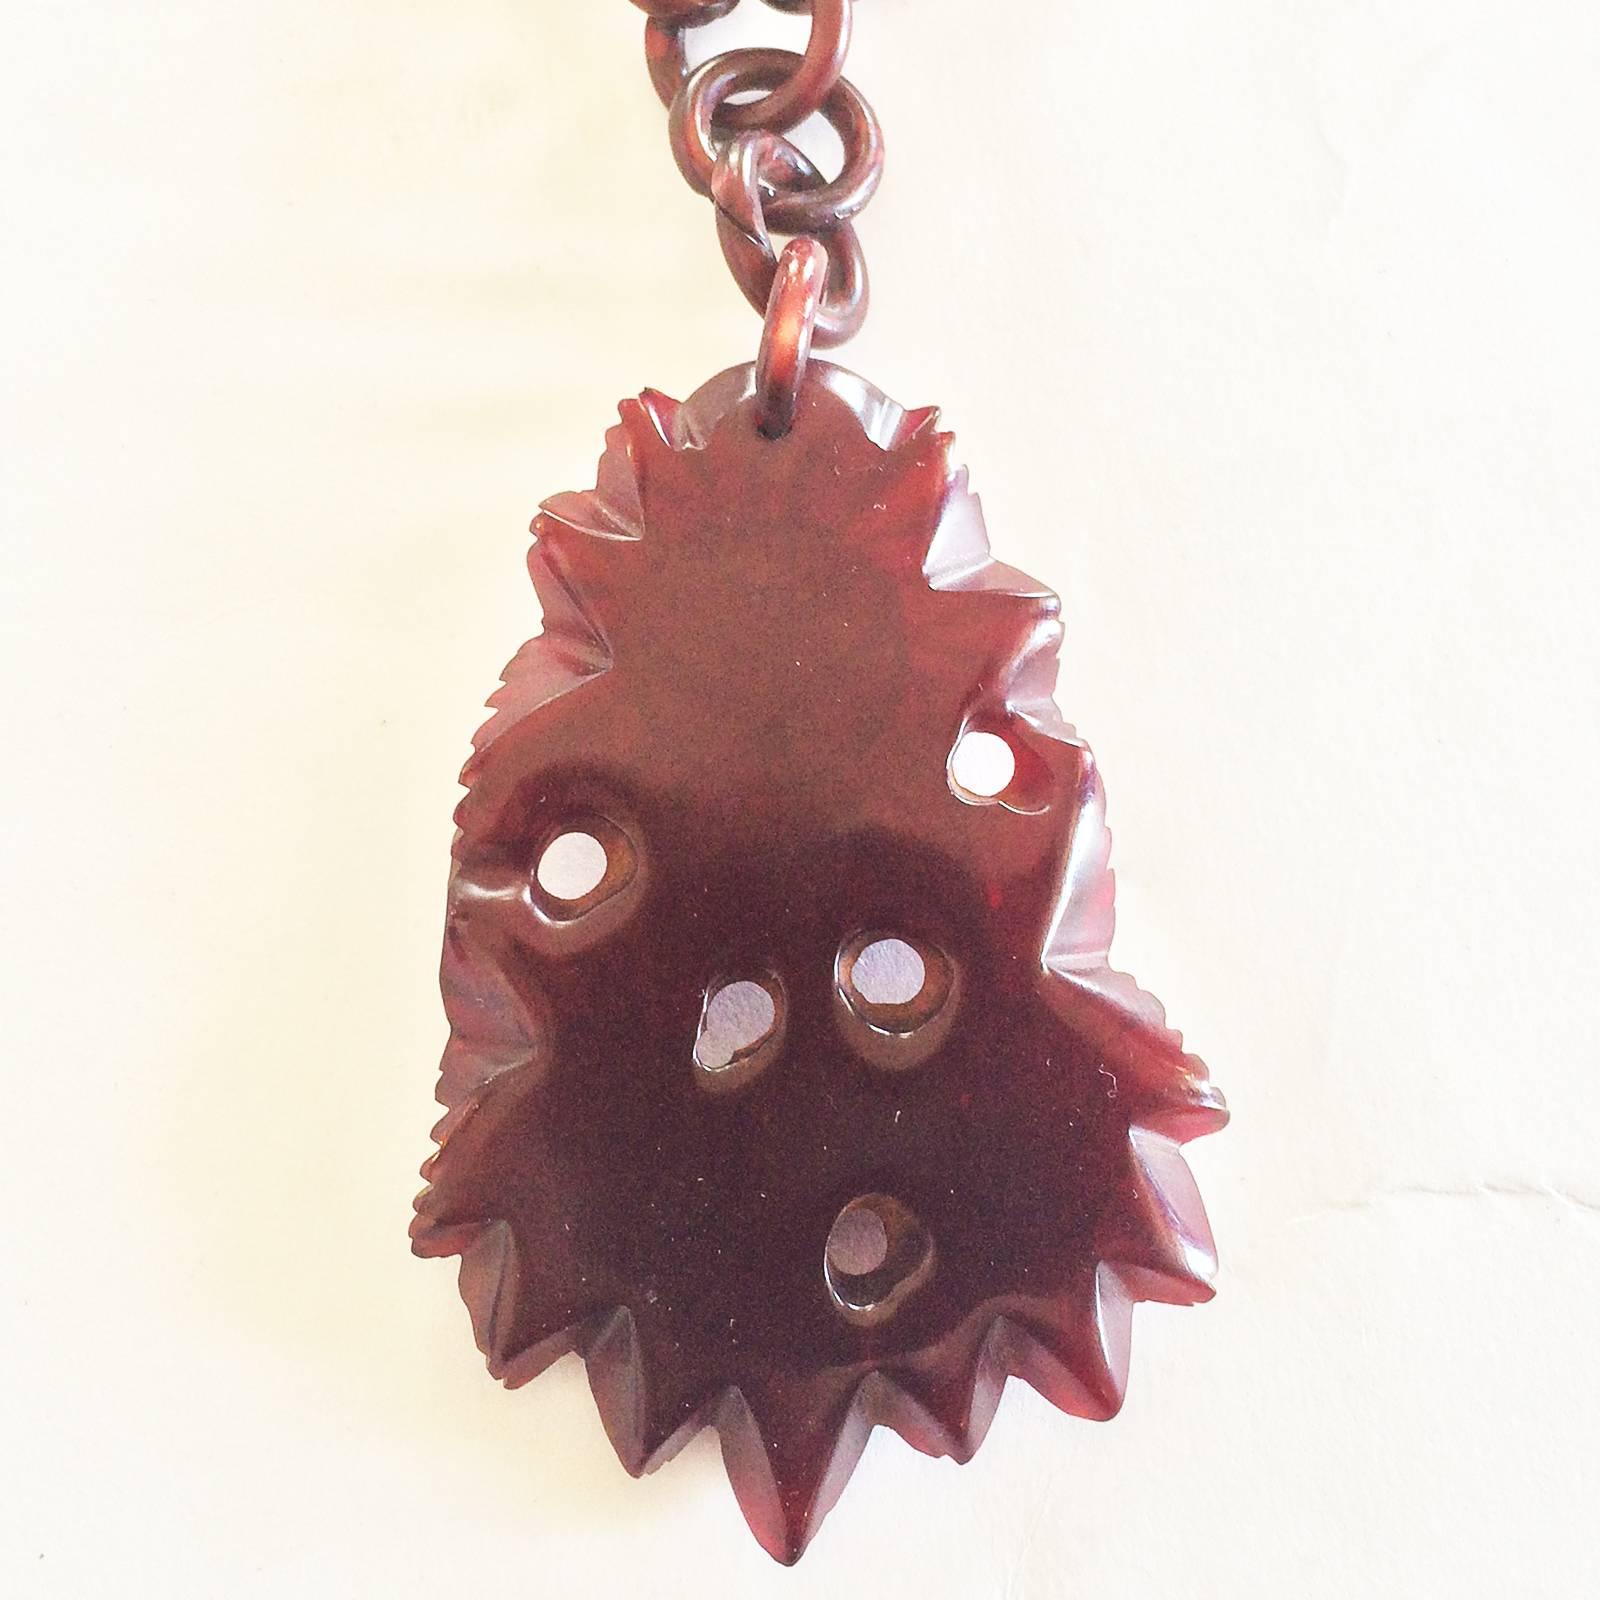 Art Deco, Very Rare Cherry Red Bakelite Necklace, with fantastic Pendant, very fine, pierced carving, with 3 interlocking Roses and leaves, with continuous, original linked chain. For this piece to have survived in such pristine condition with the